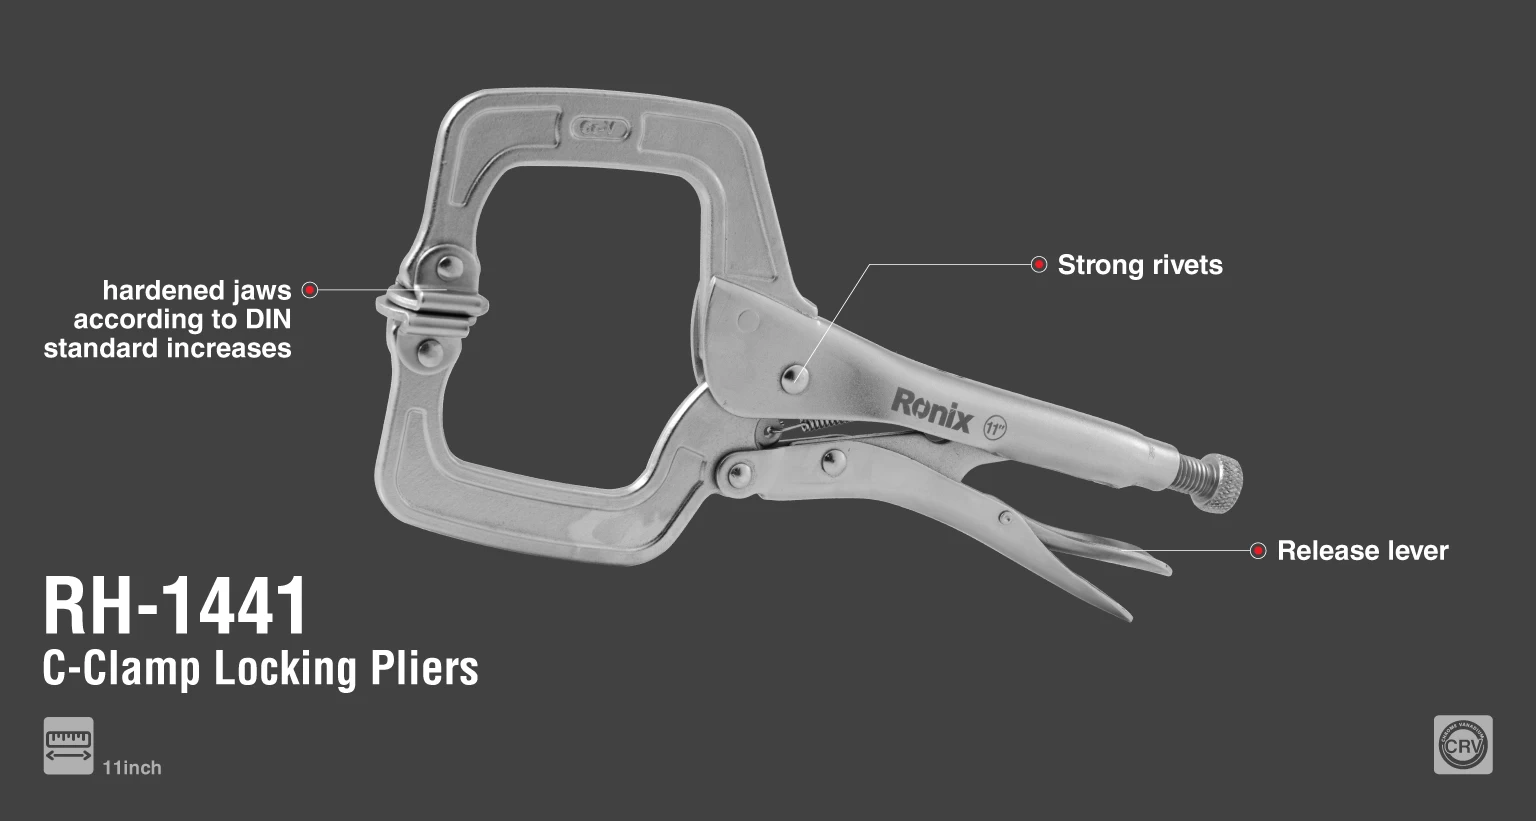 C-Clamp Locking Pliers 11 inch_details